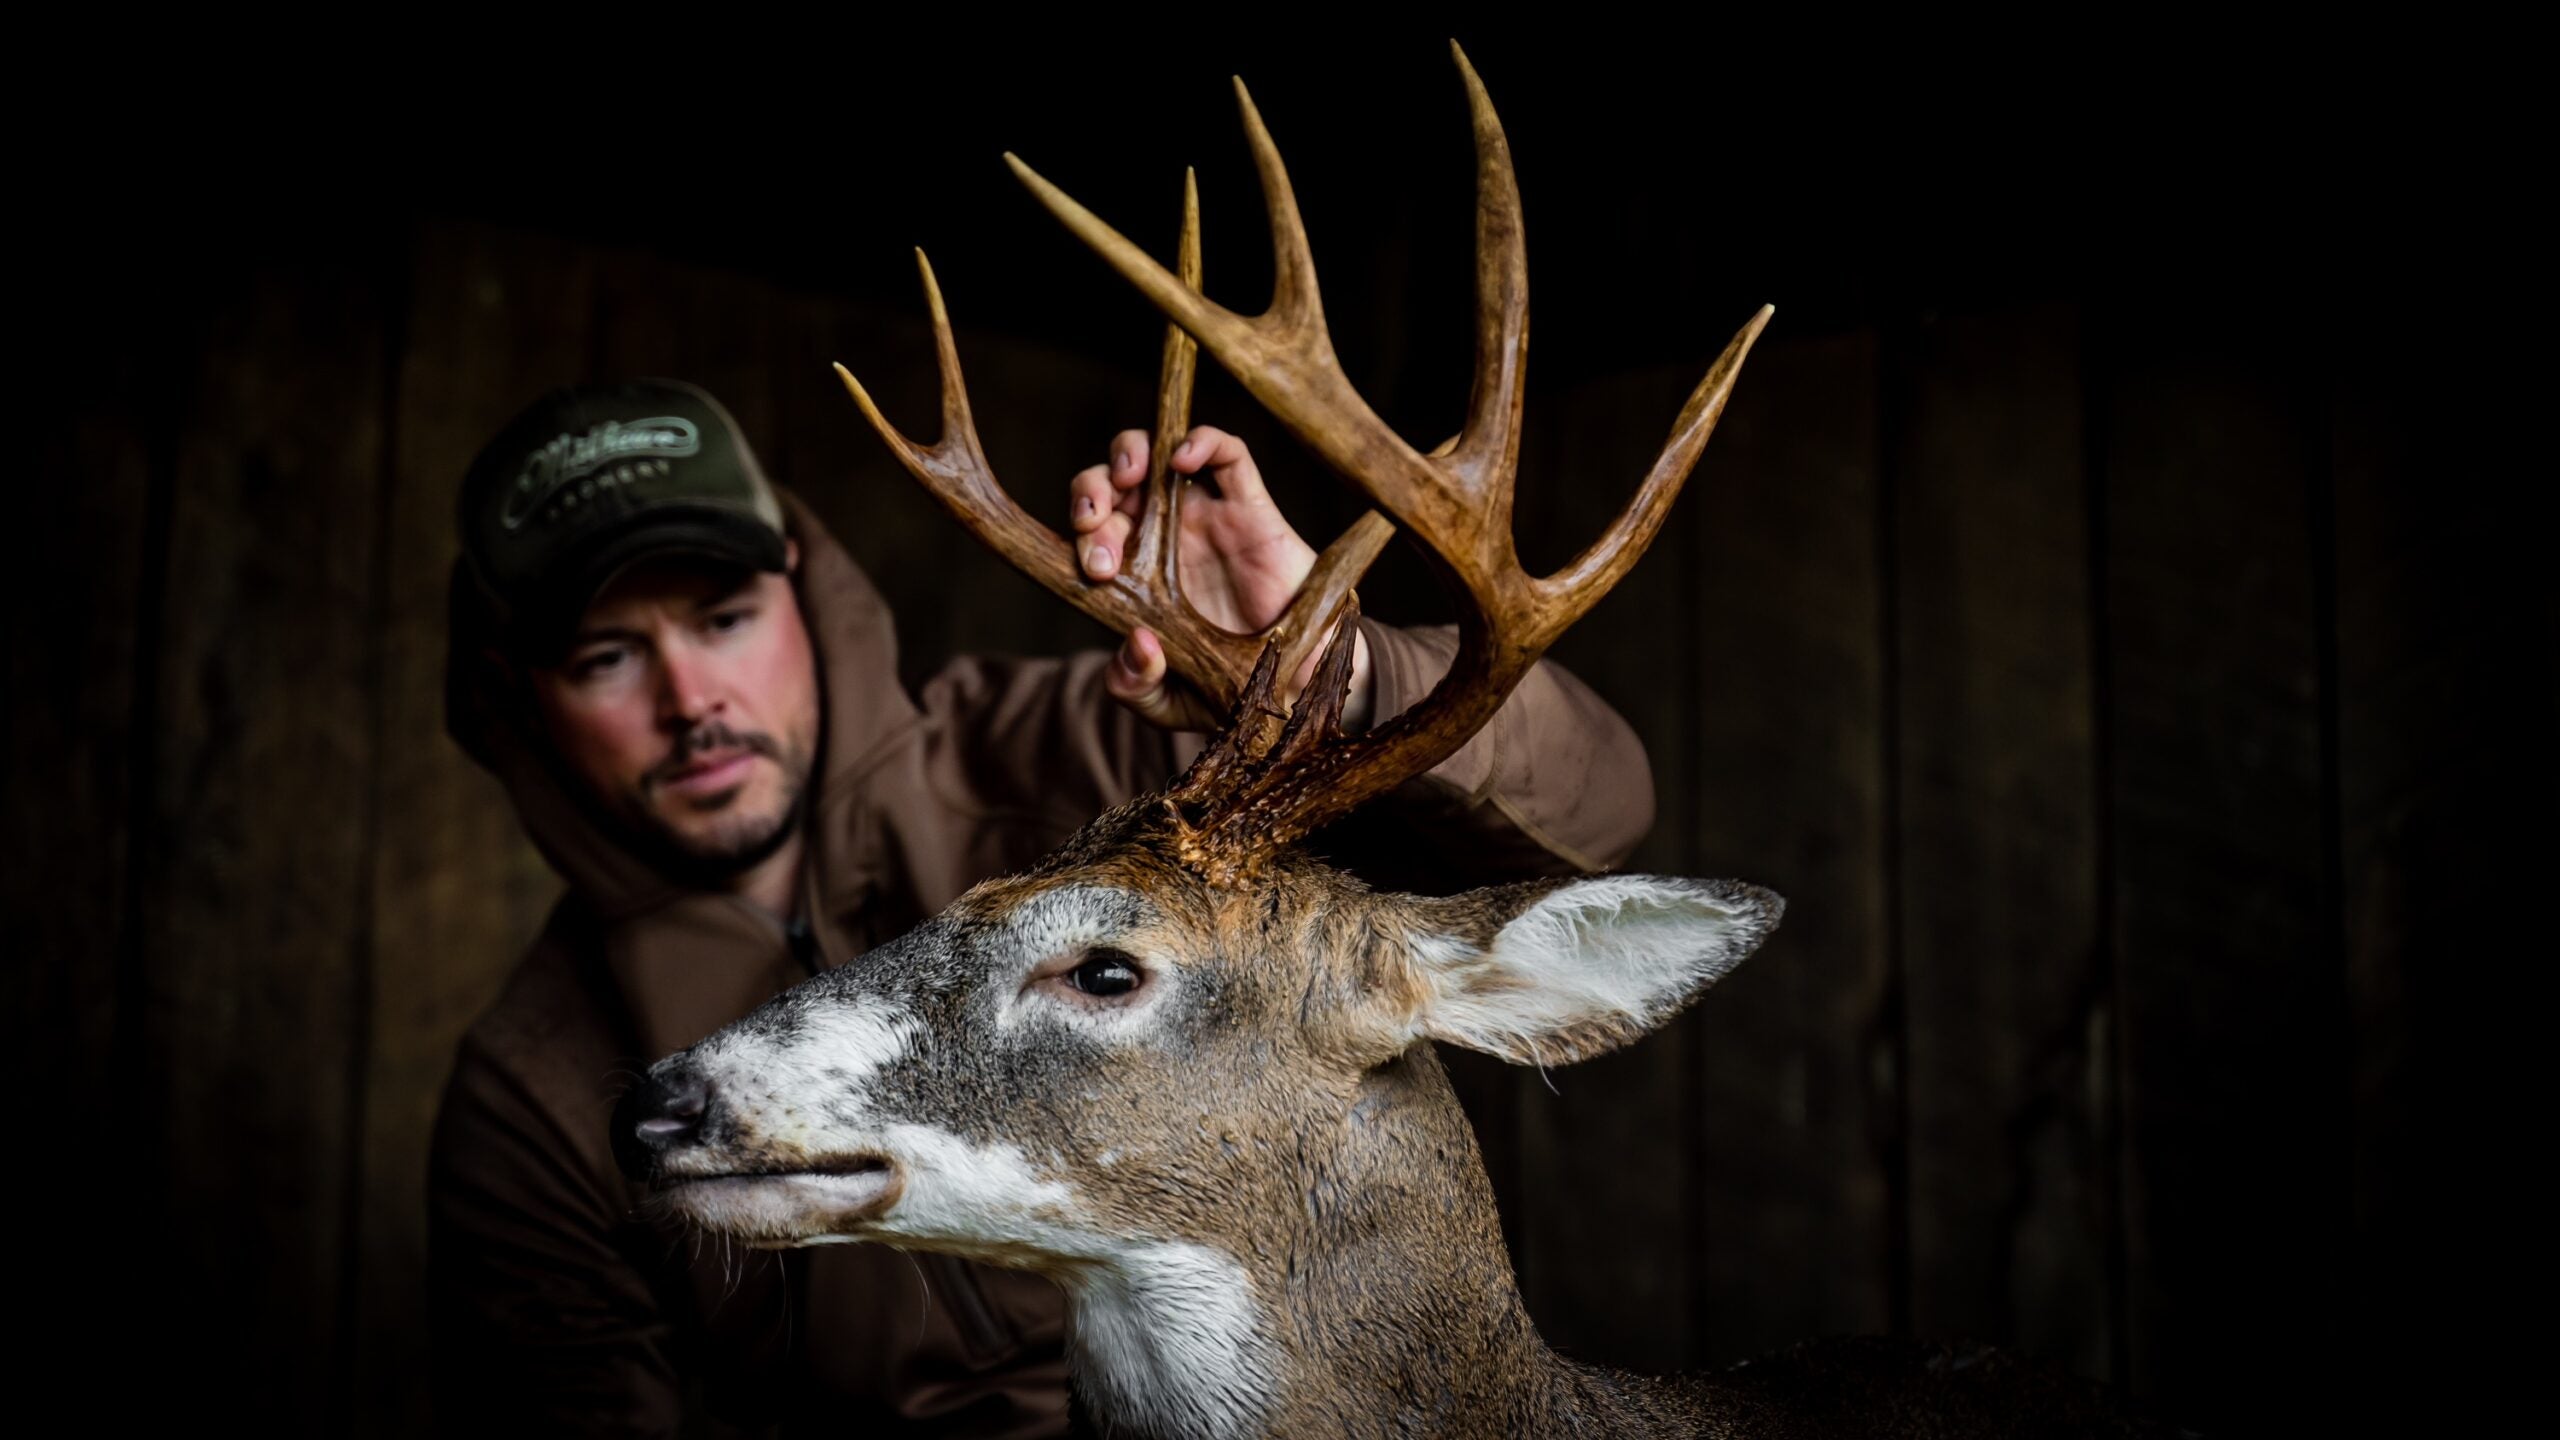 man holds anglers of whitetail deer buck with patches of white on the deer's face